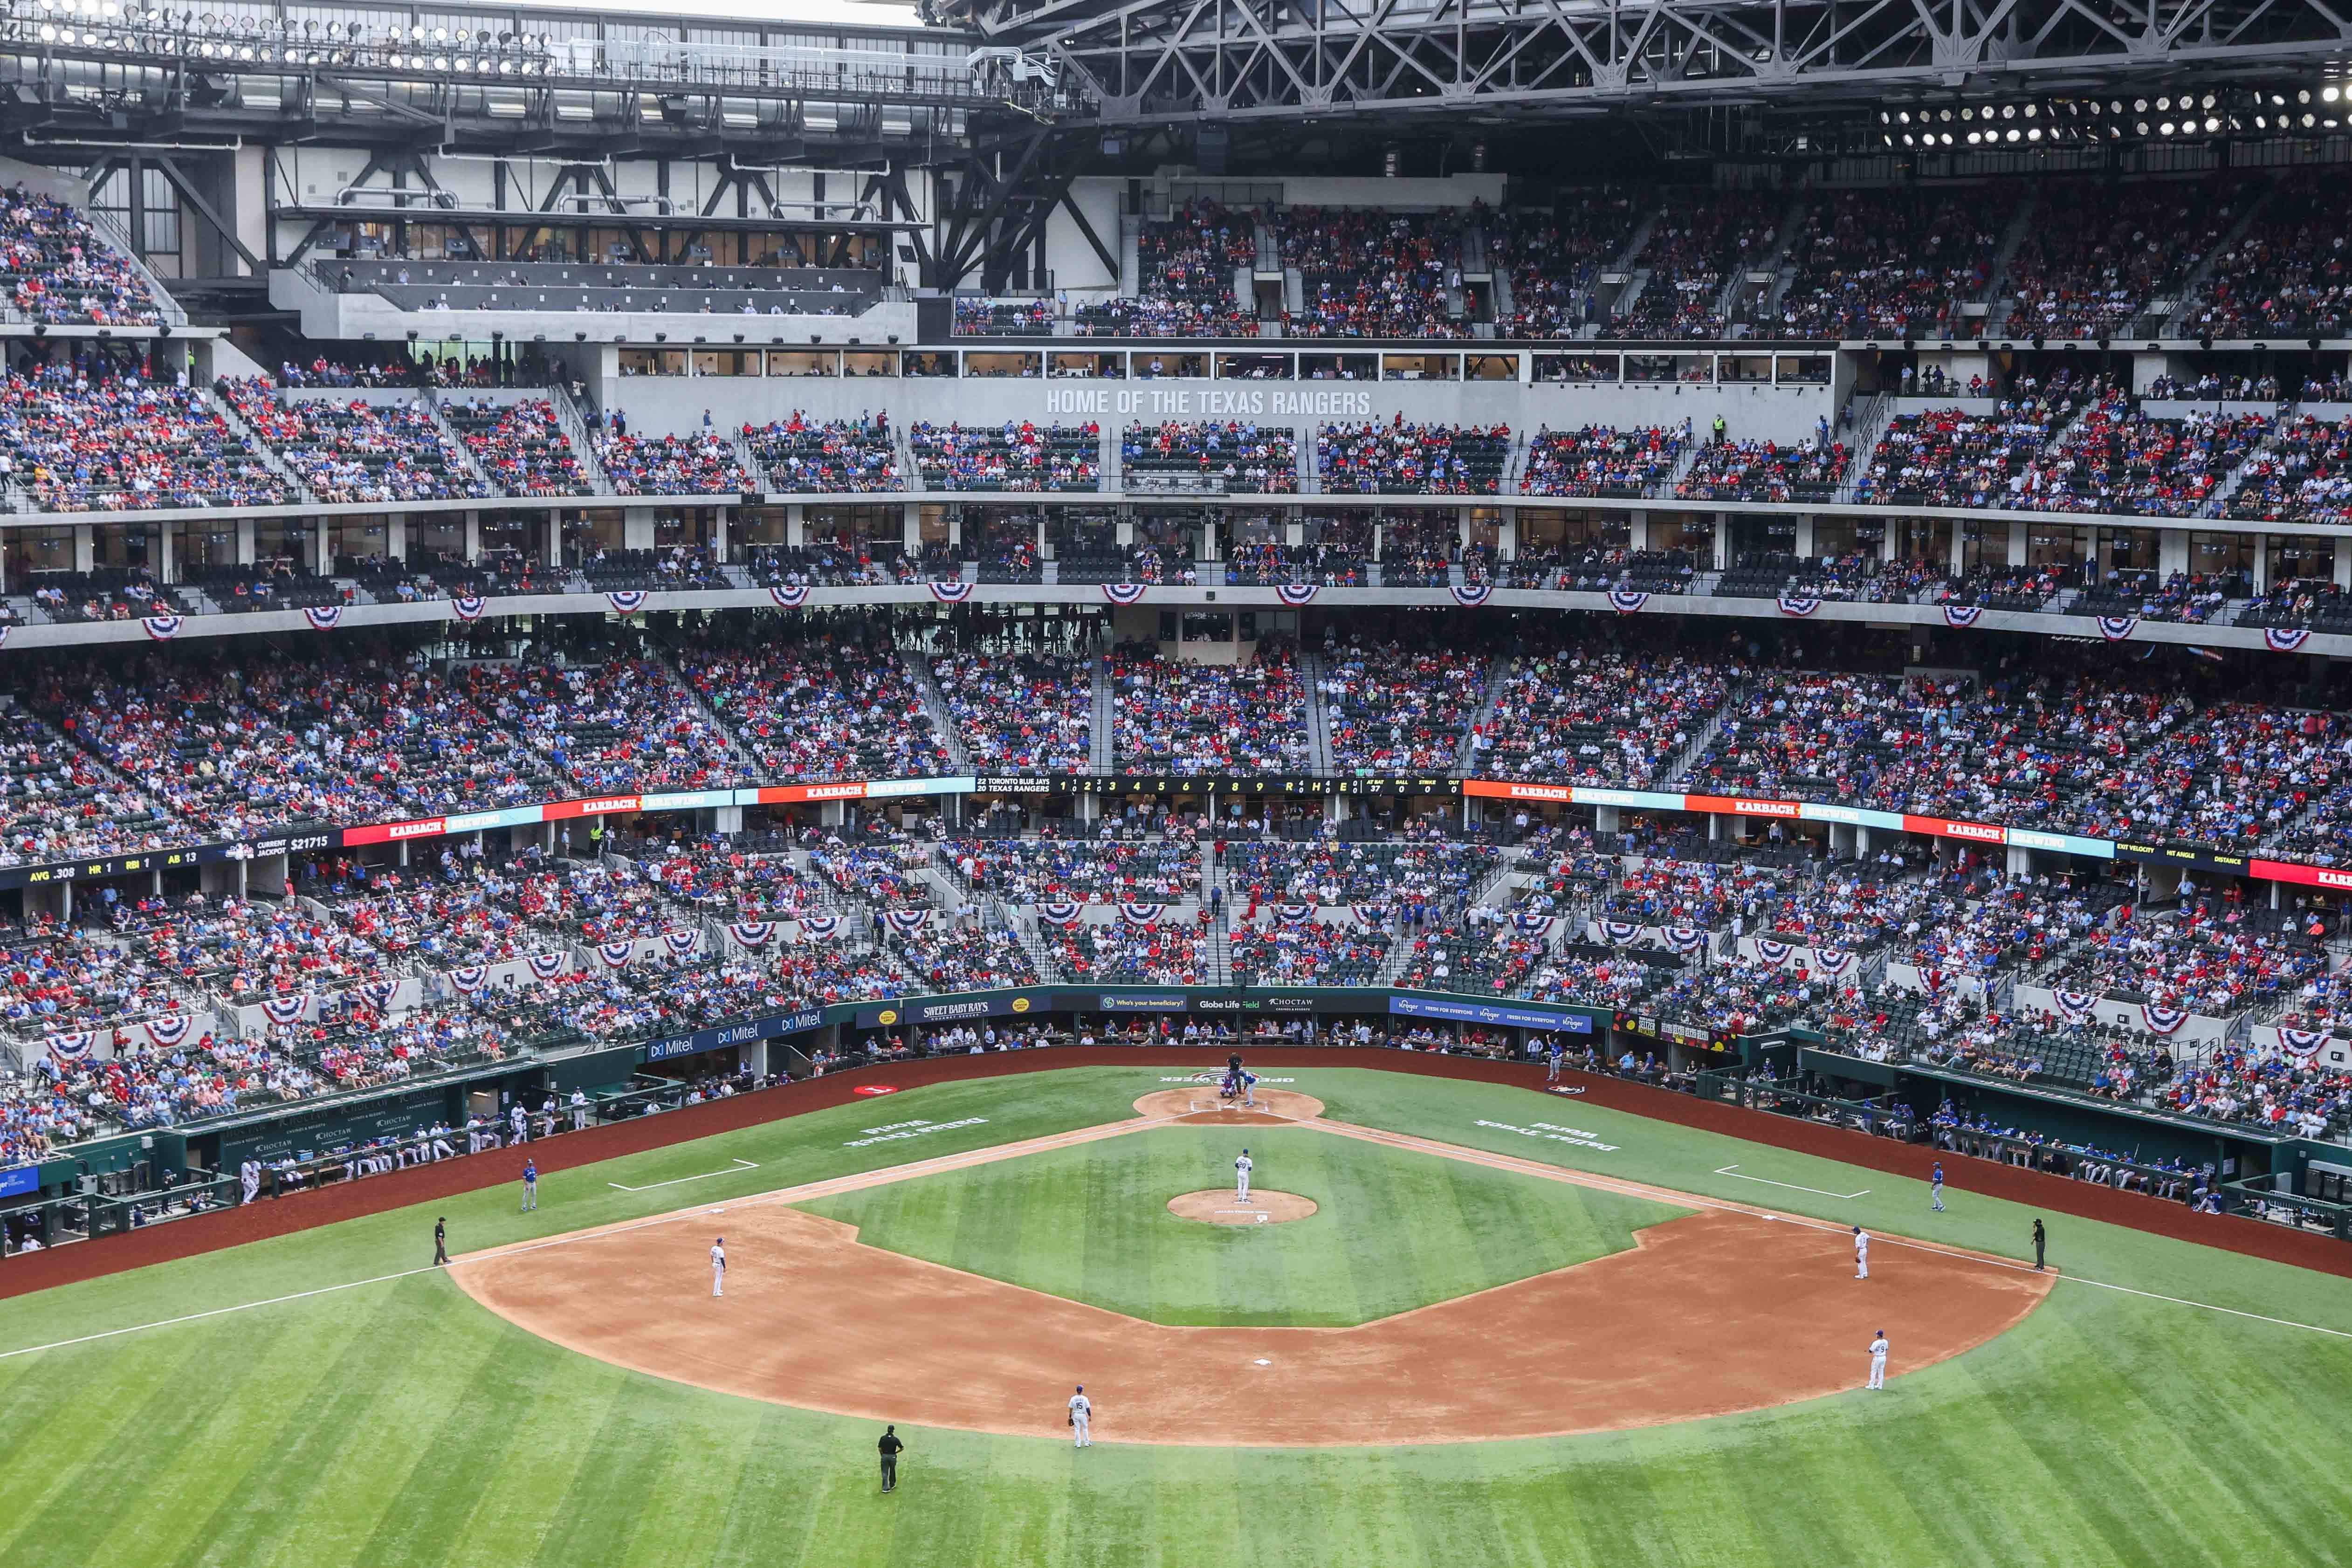 MLB Fans Pack Texas Rangers' Stadium, What Social Distancing?!